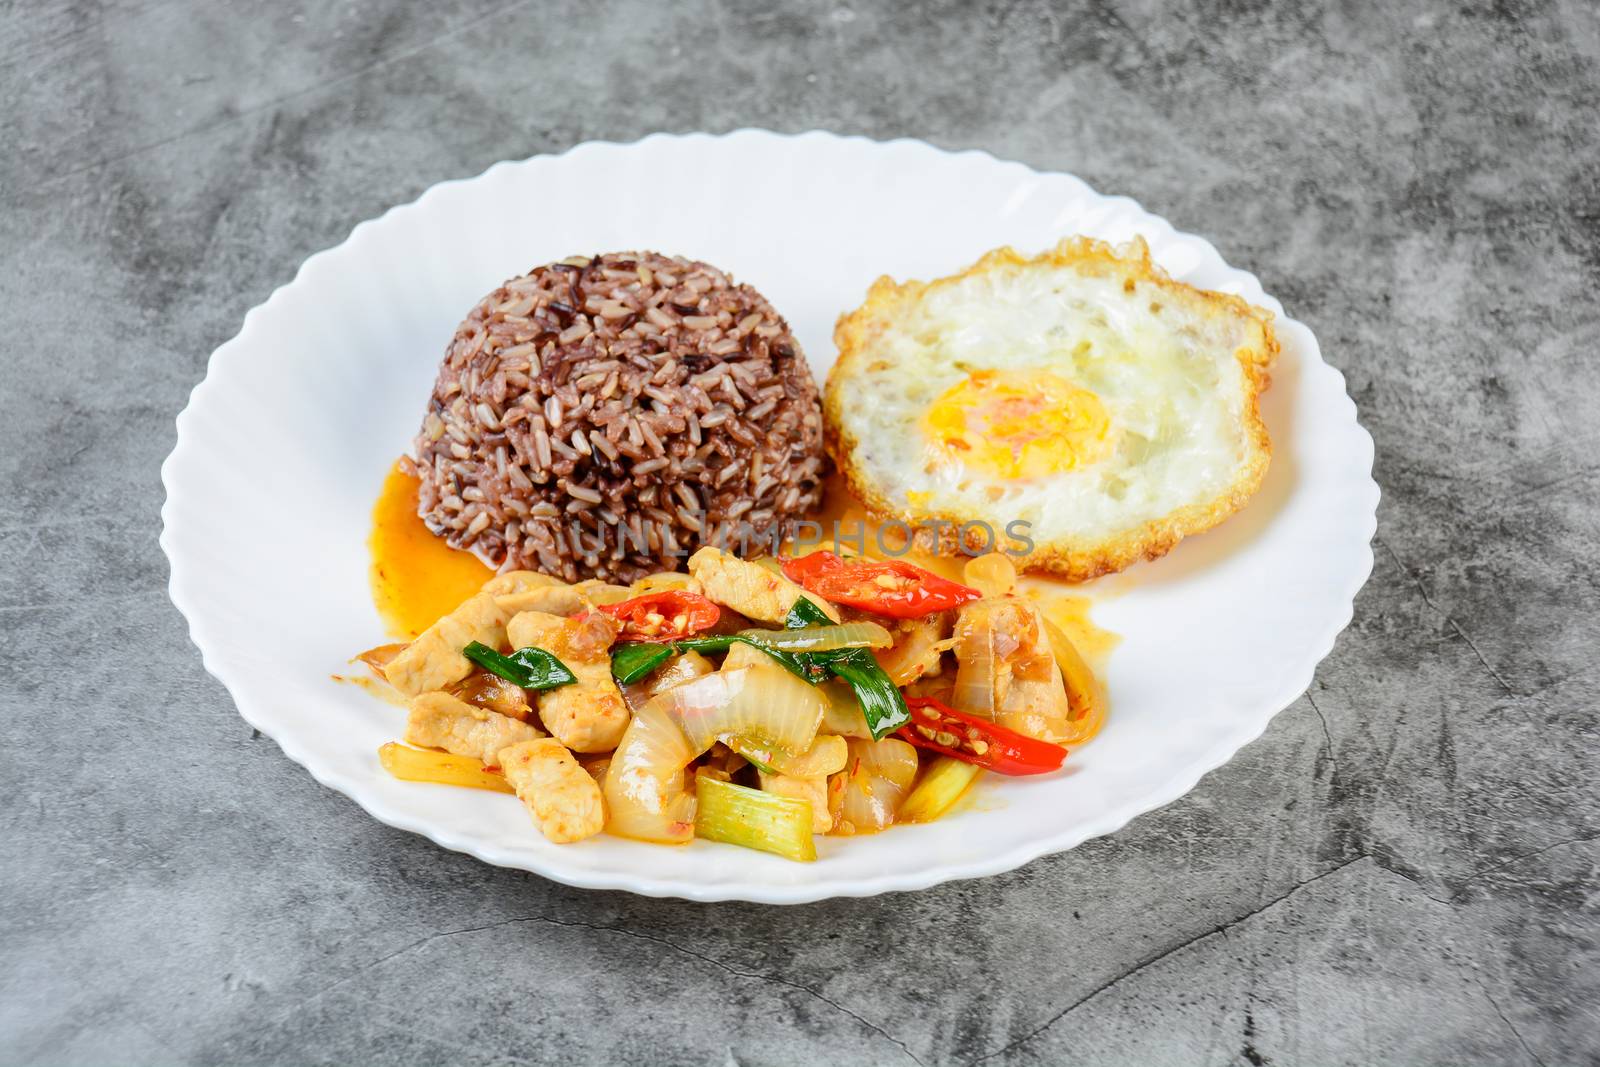 Stir fry chicken sweet onion and peppers, served with brown rice and fried egg on white plate
